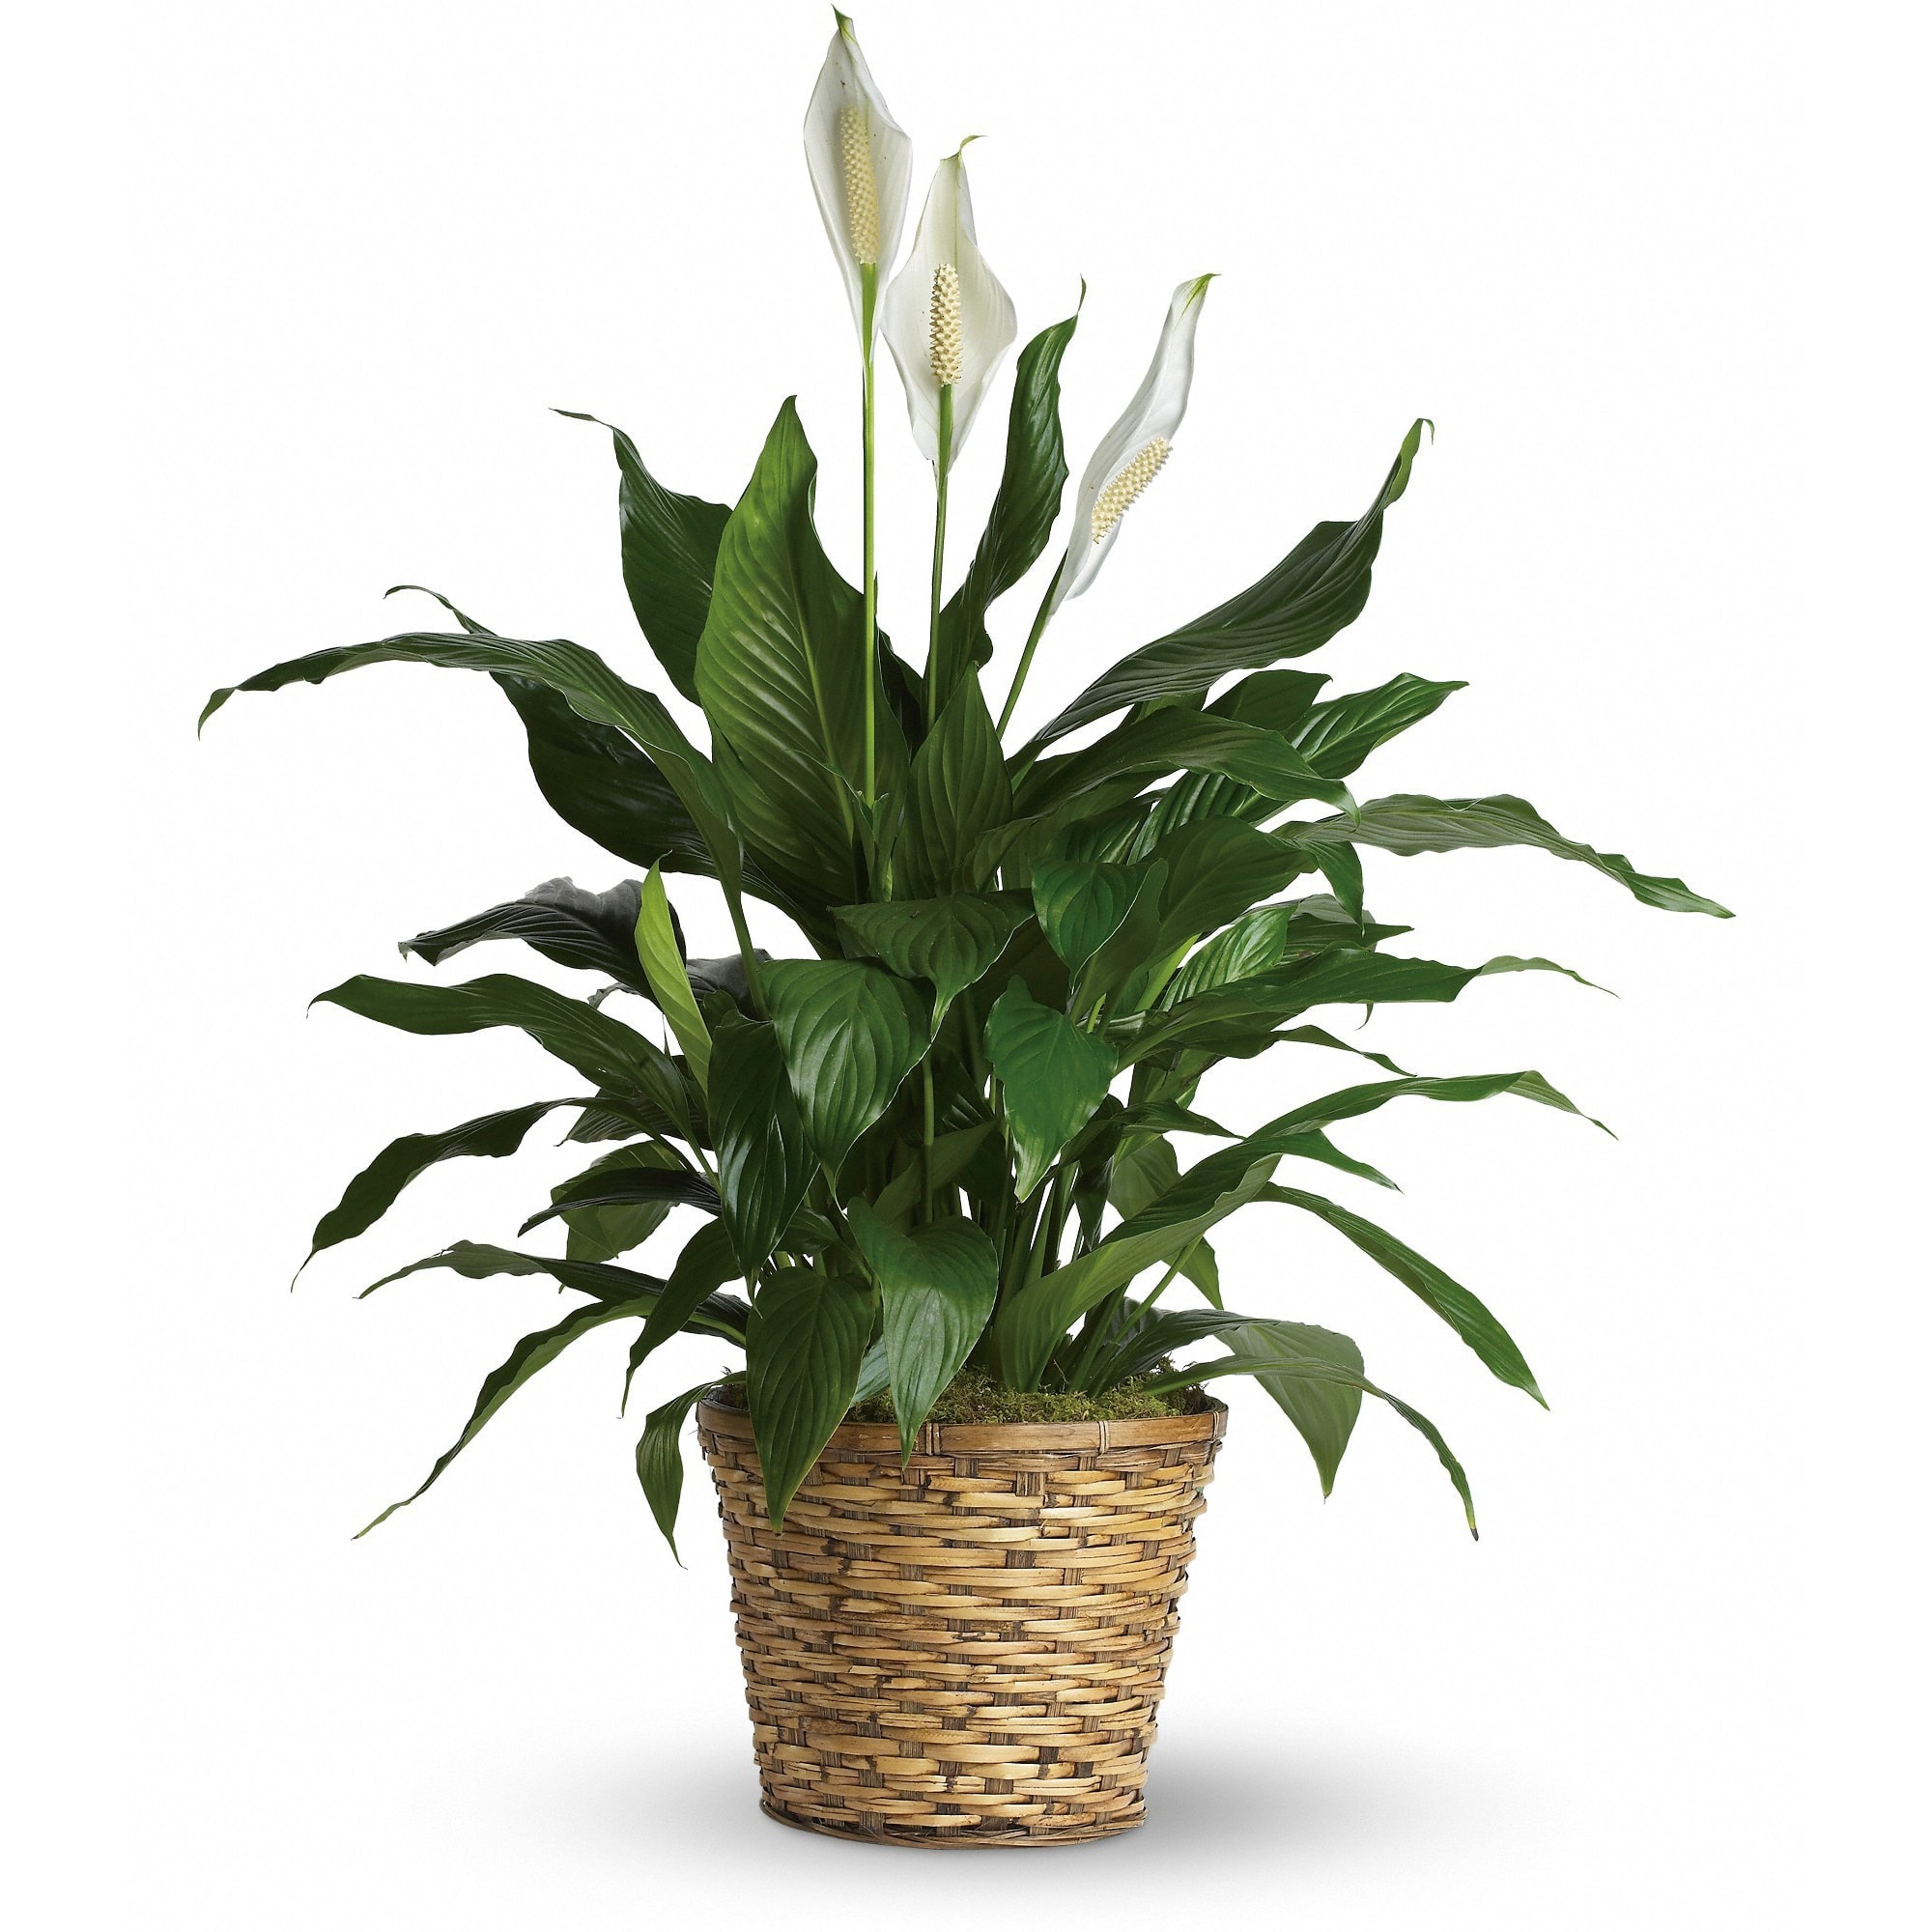 Simply Elegant Spathiphyllum - Medium - Known for its indoor beauty and ability to clear the air of contaminants, this brilliant green plant with dazzling white blossoms makes a perfect gift for almost any occasion. low-maintenance. High quality. Bet you never knew delivering elegance could be this simple.    This spathiphyllum comes in an 8&quot; woven wicker basket. It's a great medium for delivering vitality.    Approximately 30 1/2&quot; W x 37&quot; H    Orientation: N/A    As Shown : T105-2A